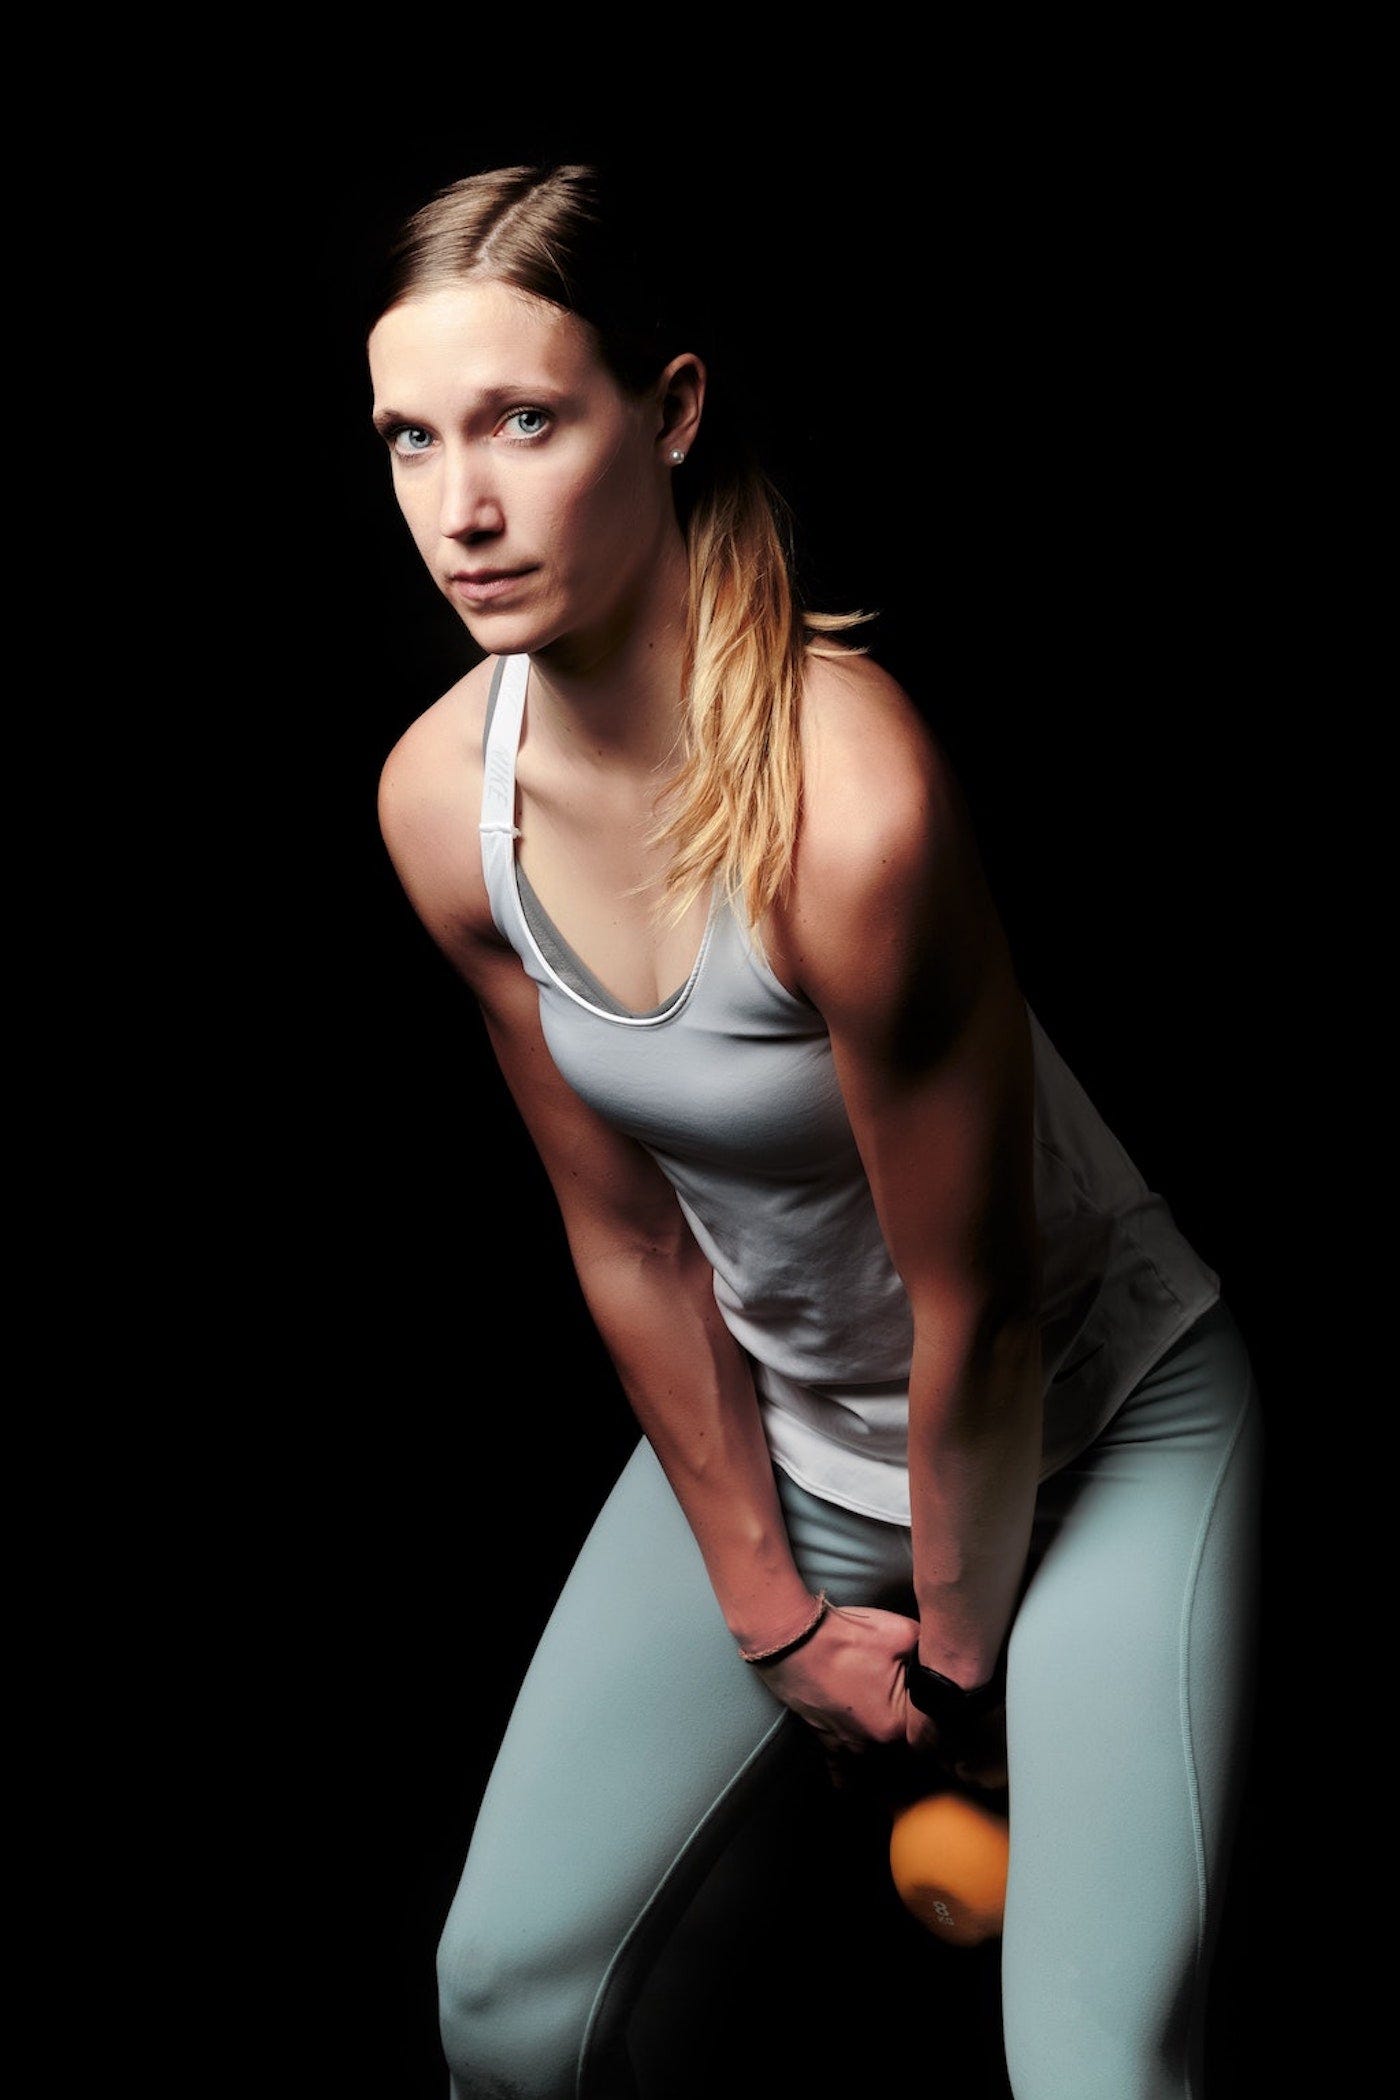 What's in your sportswear? Some insights into polyester and human health, by Franziska Mesche